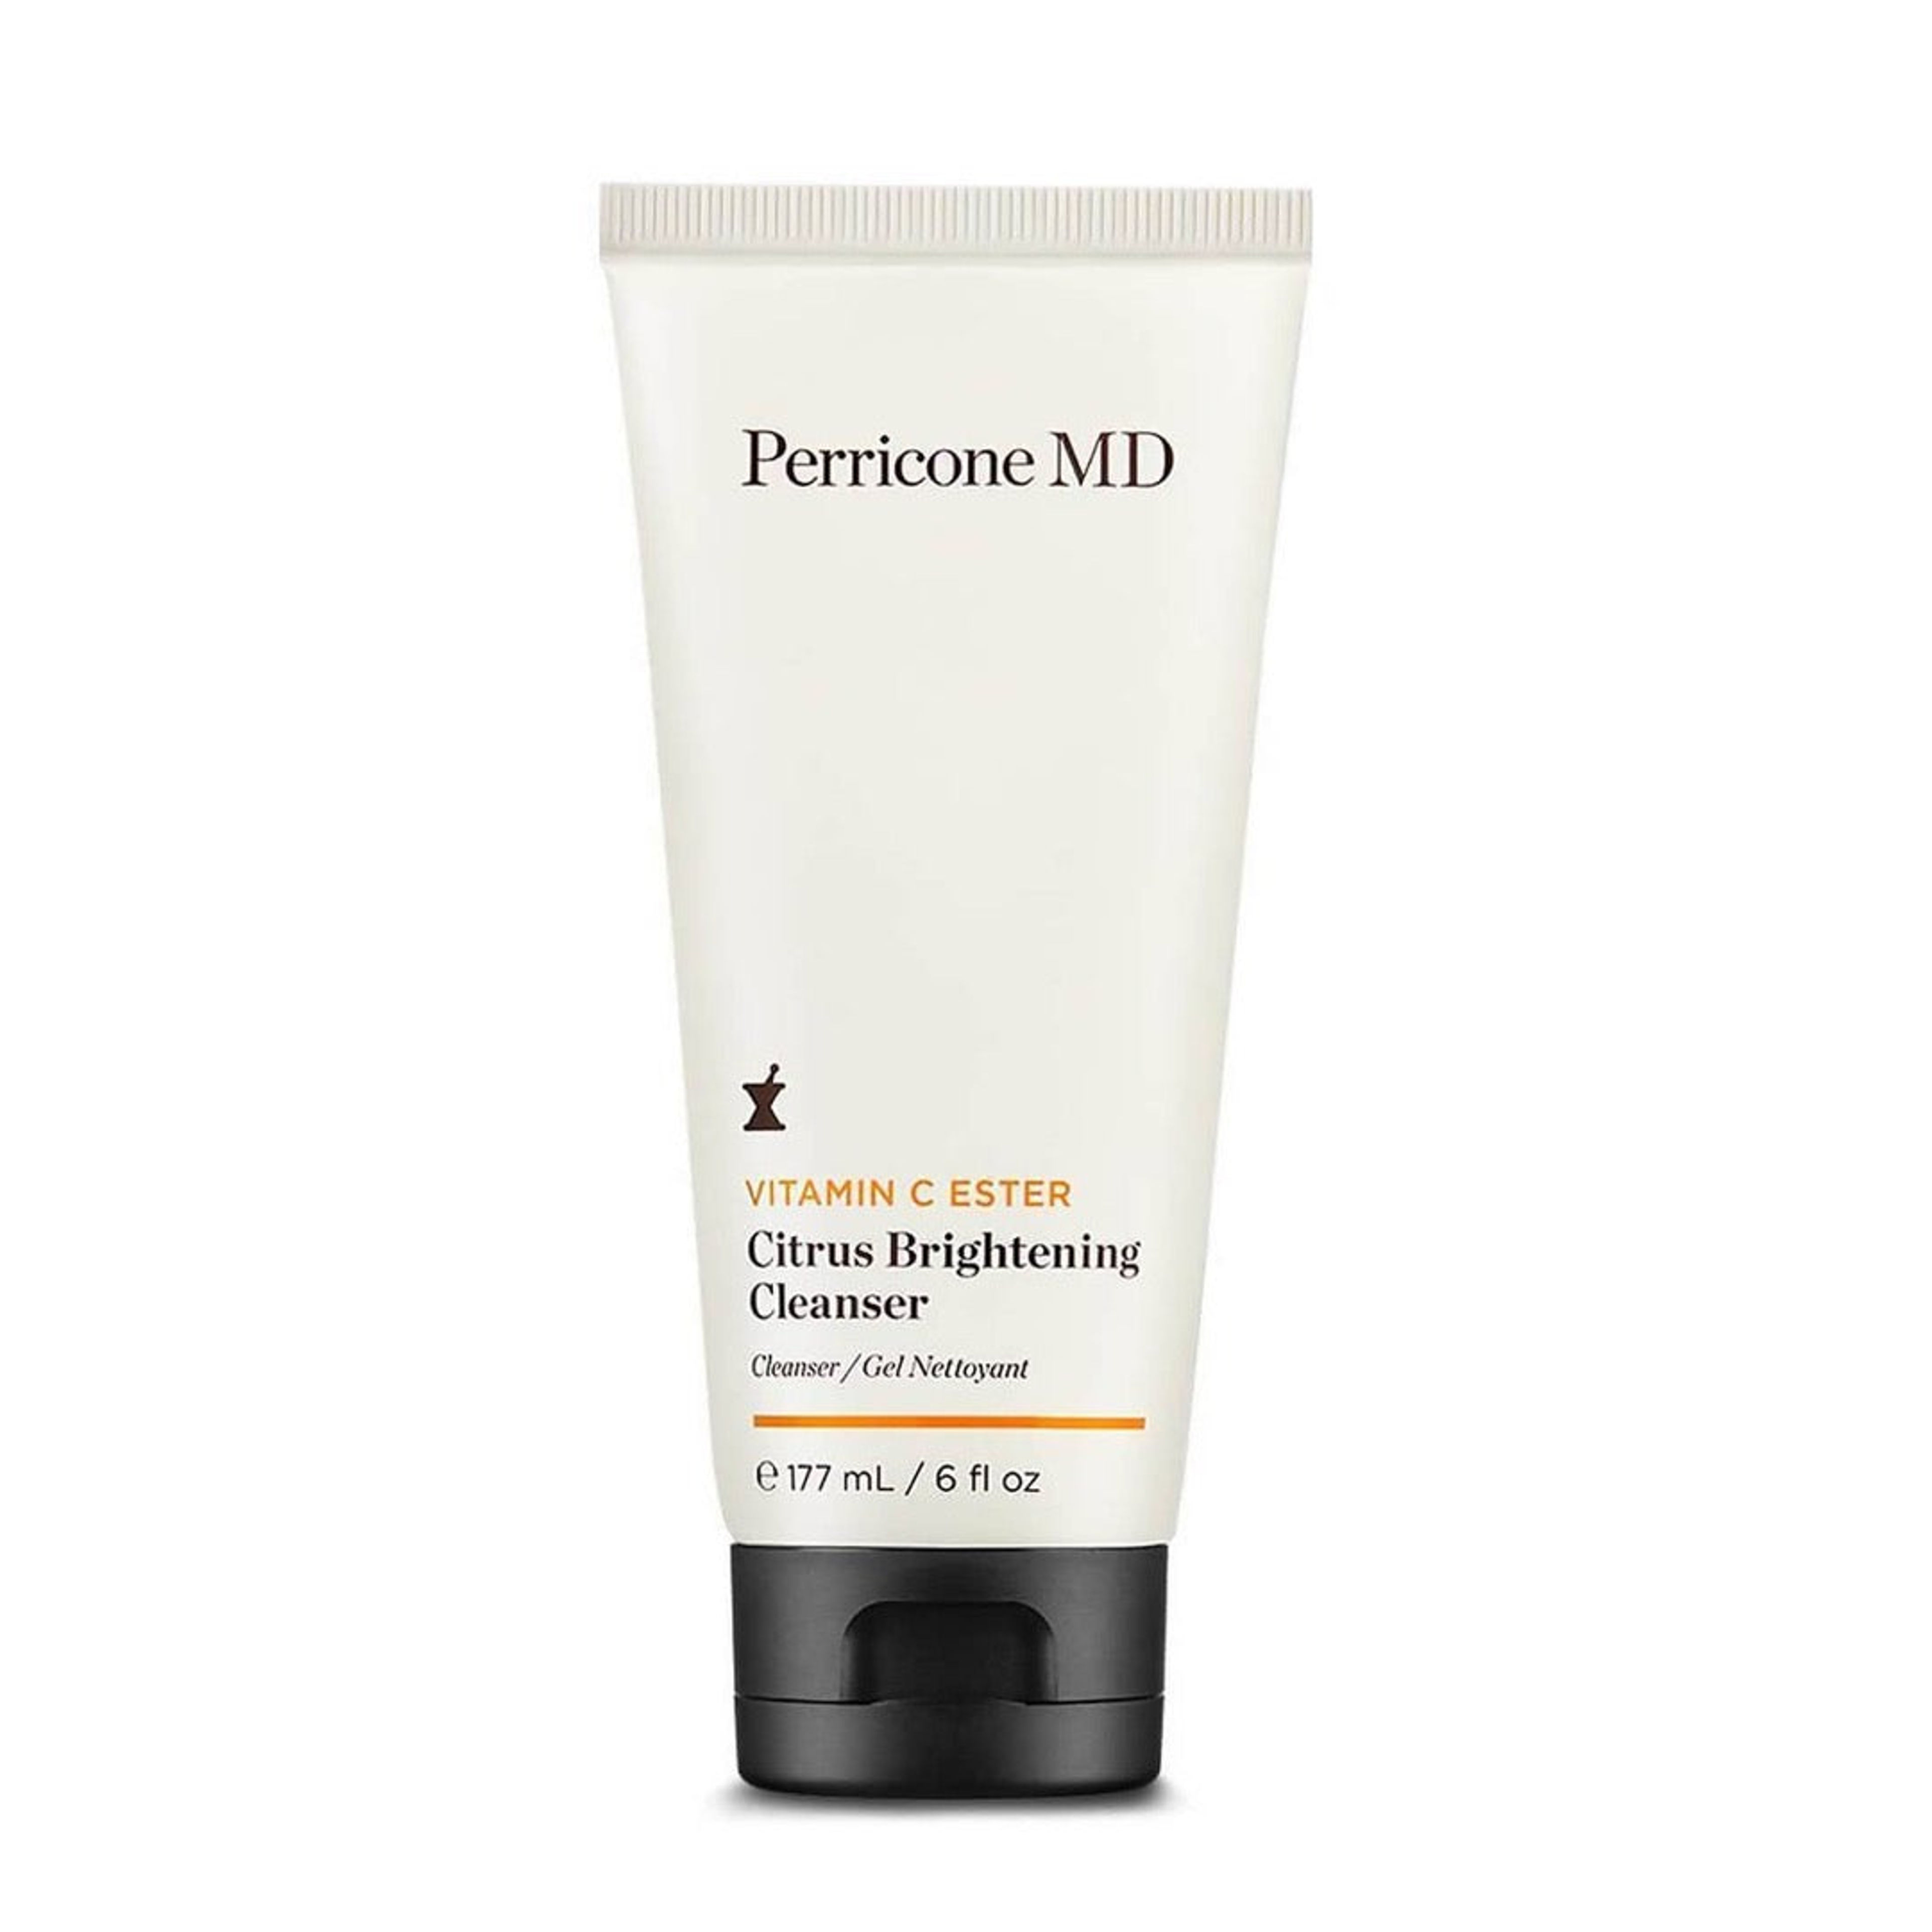 Perricone MD Vitamin C Ester Brightening Cleanser 177ml image 1 expanded